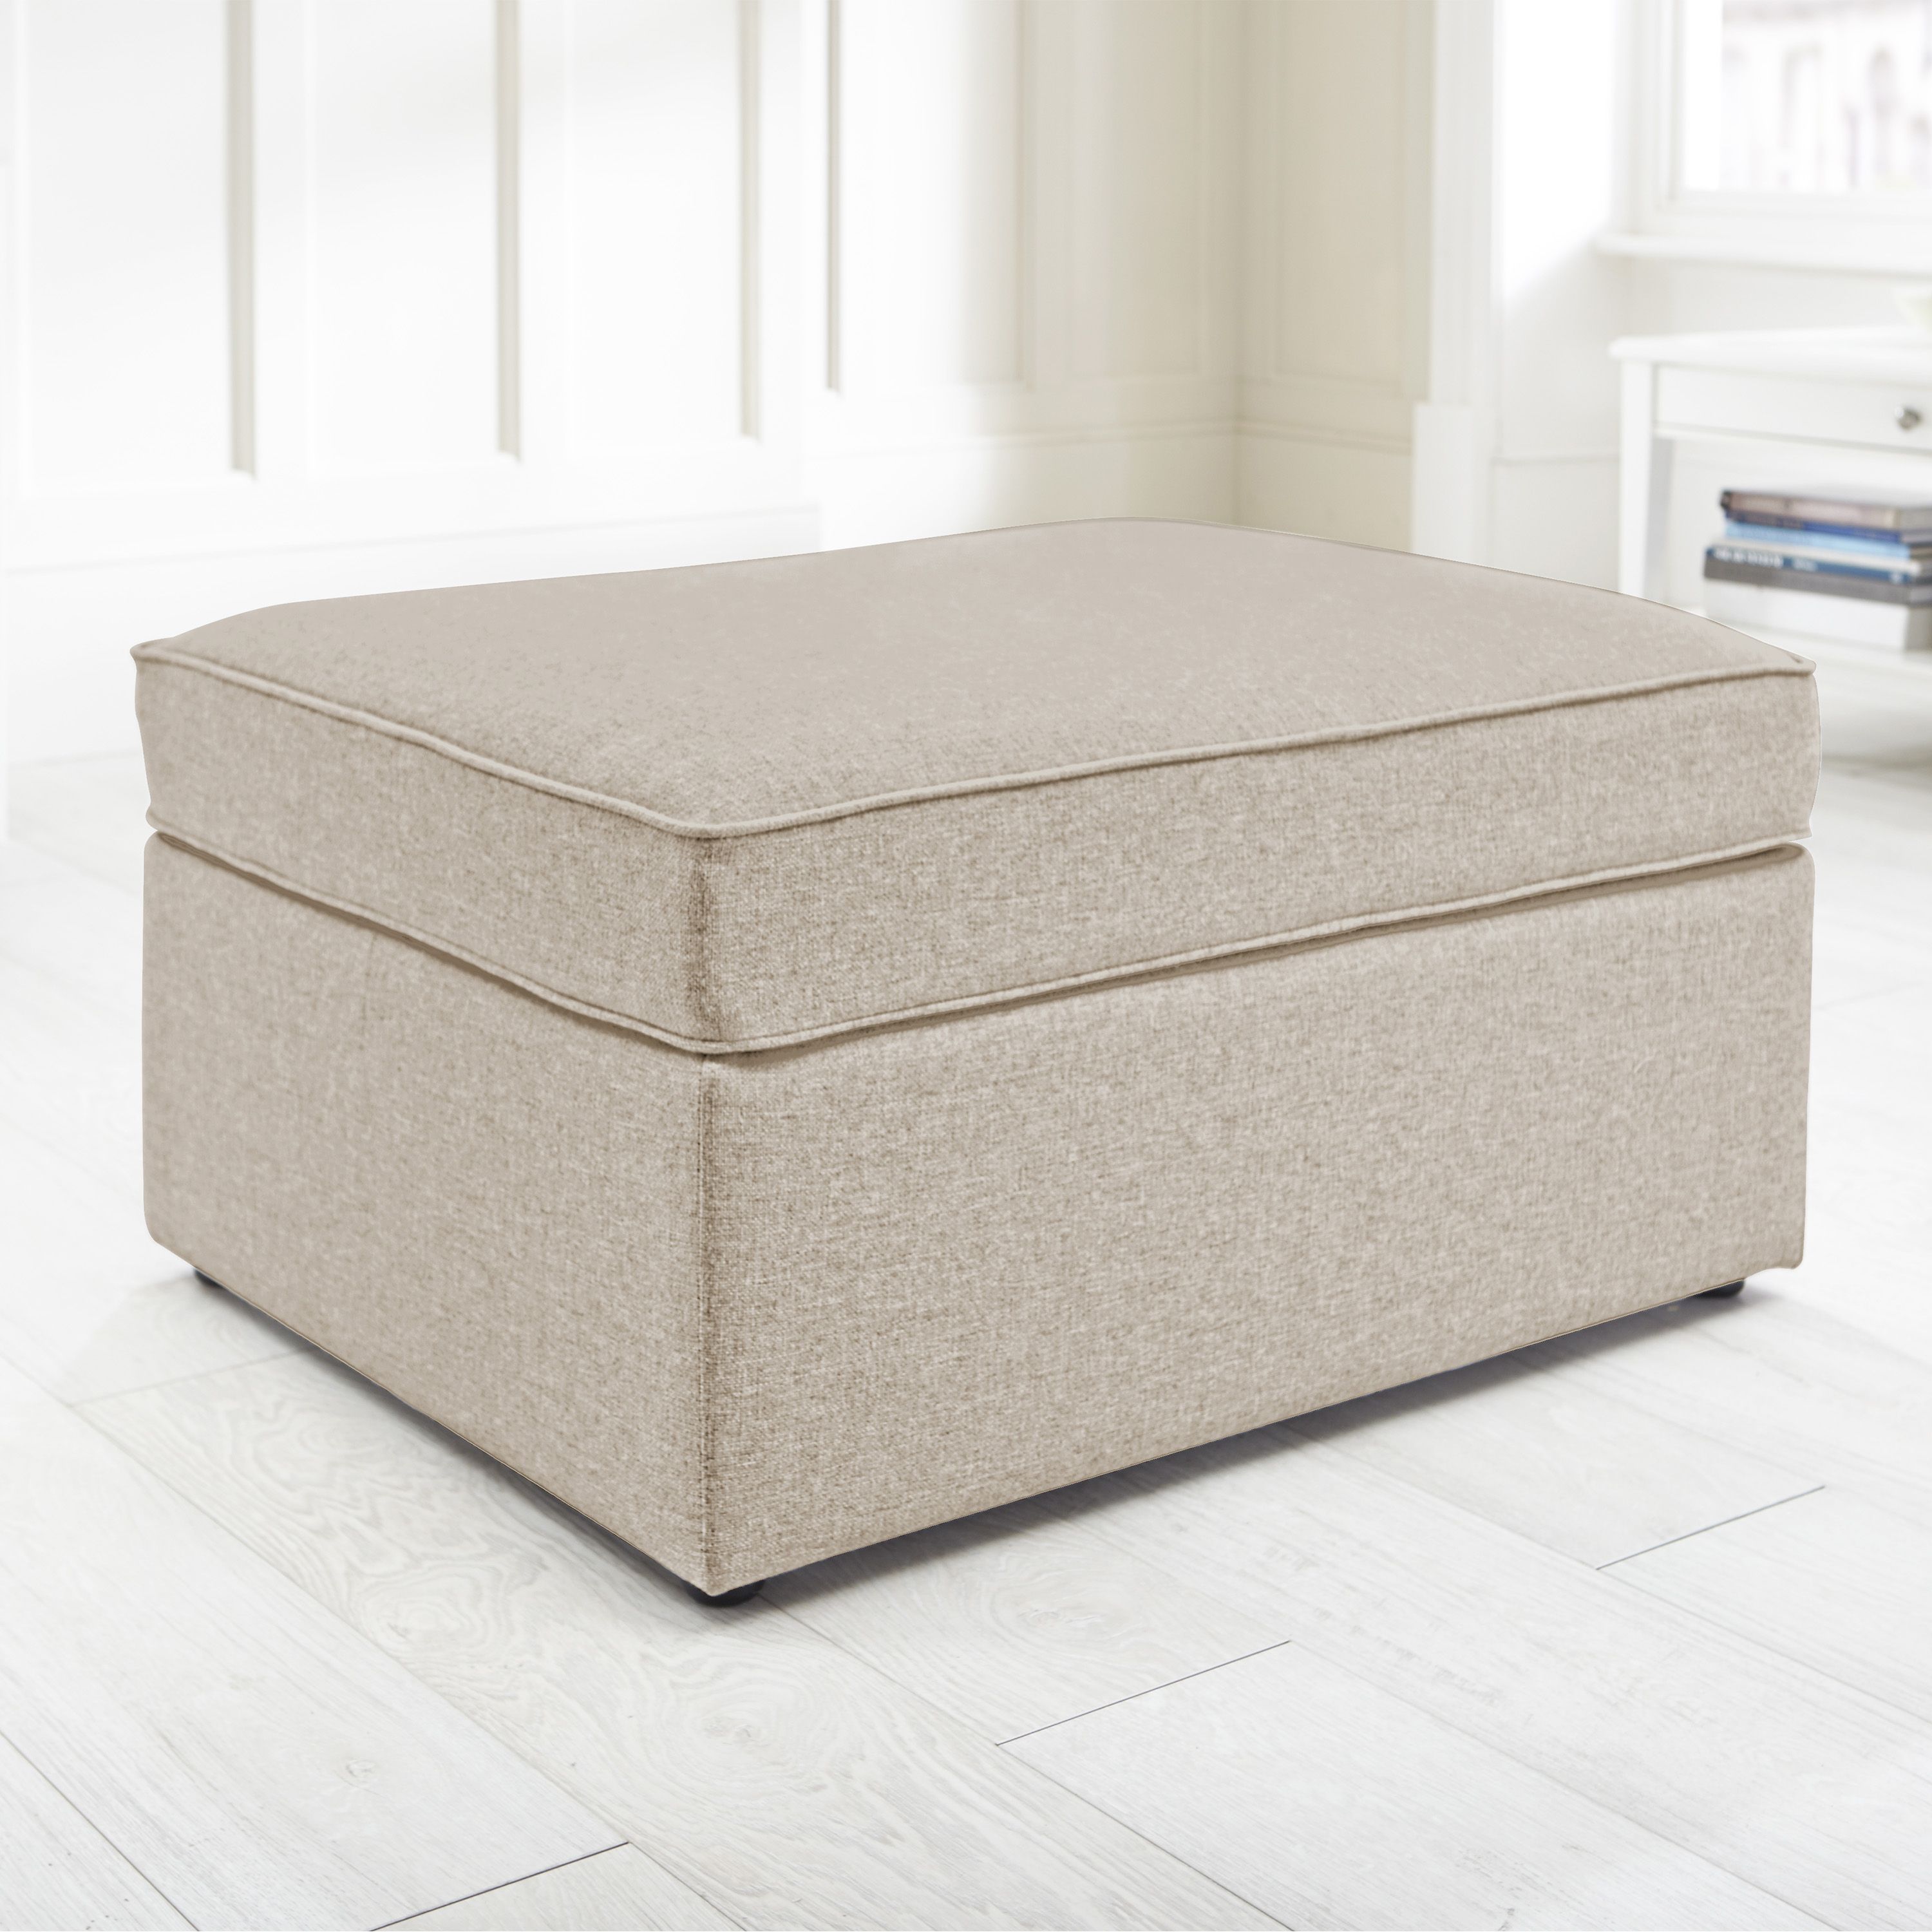 Jay-Be Autumn Footstool bed